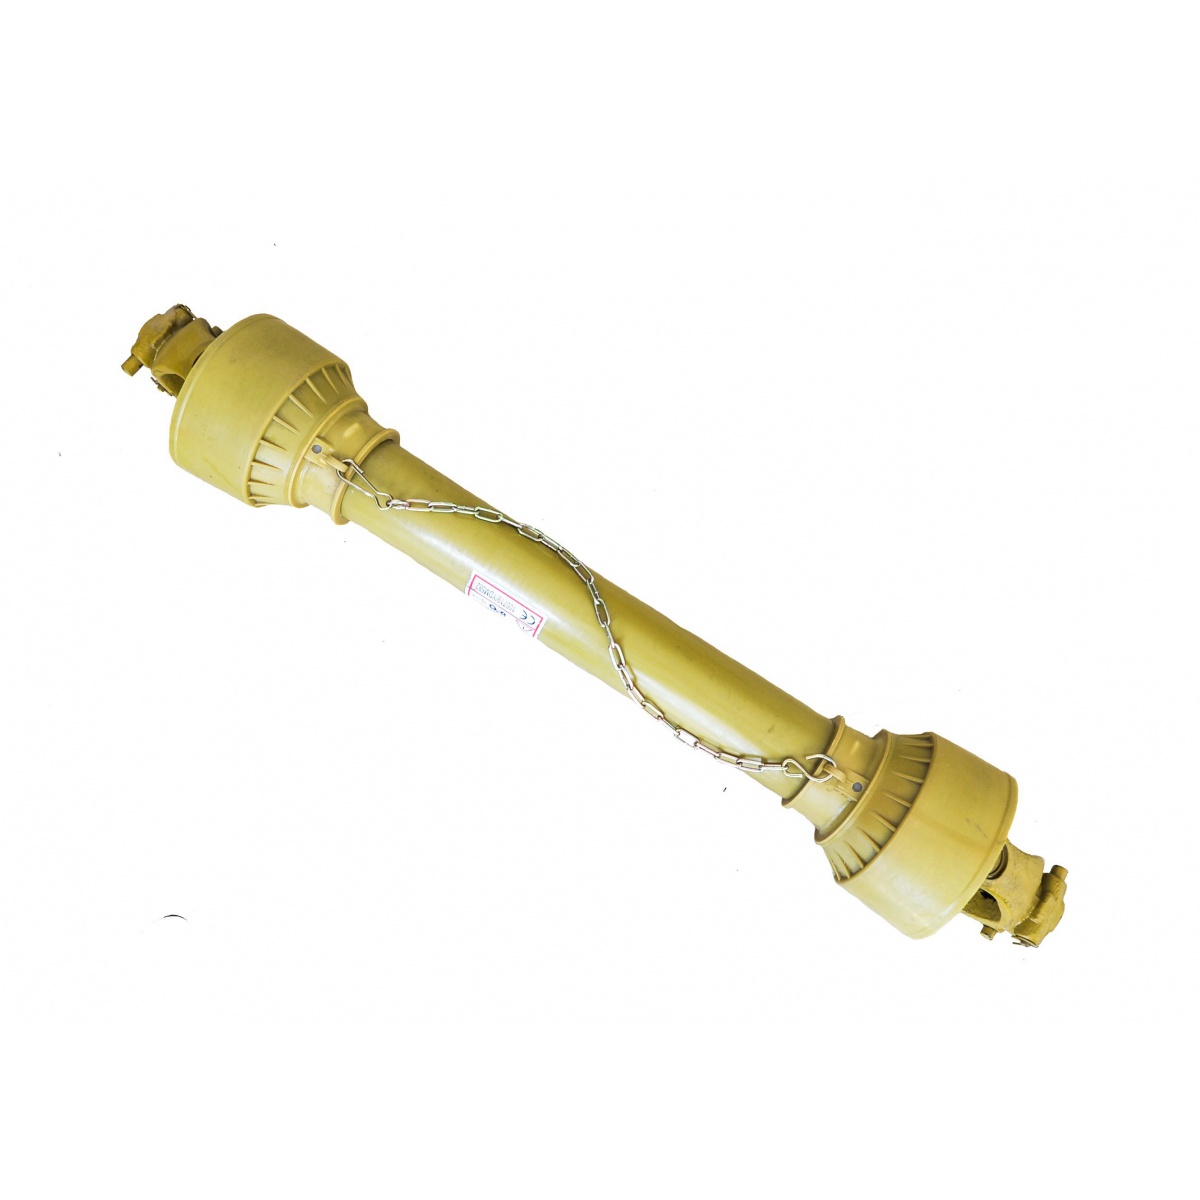 PTO shaft 07B - 100 cm / up to 105 HP